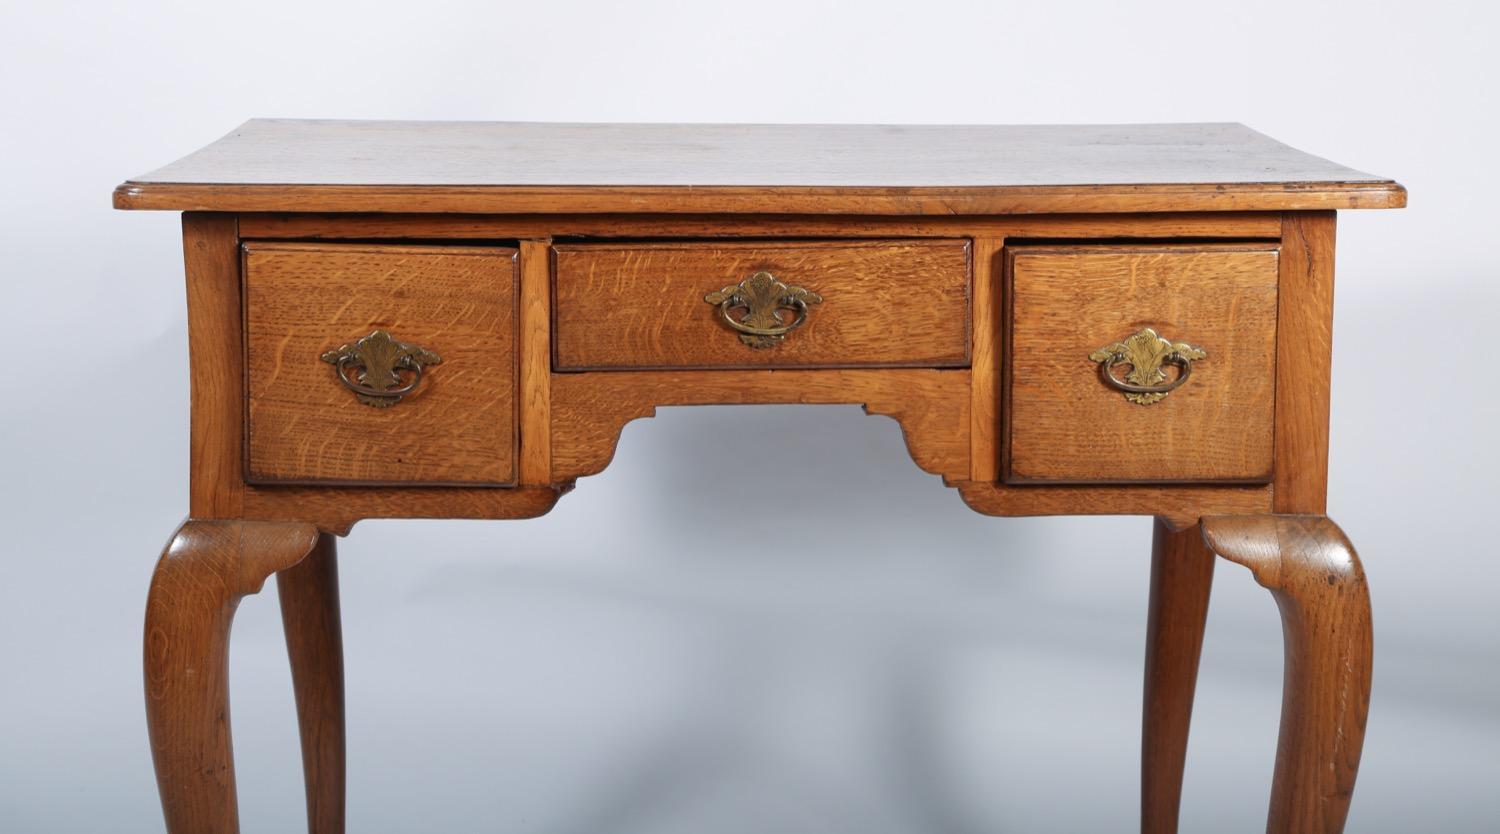 Fine 18th century oak lowboy having thumb molded top over two deep and one shallow central door, each with etched brass bail pulls, standing on graceful cabriole legs and having a nice, mellow pale color.